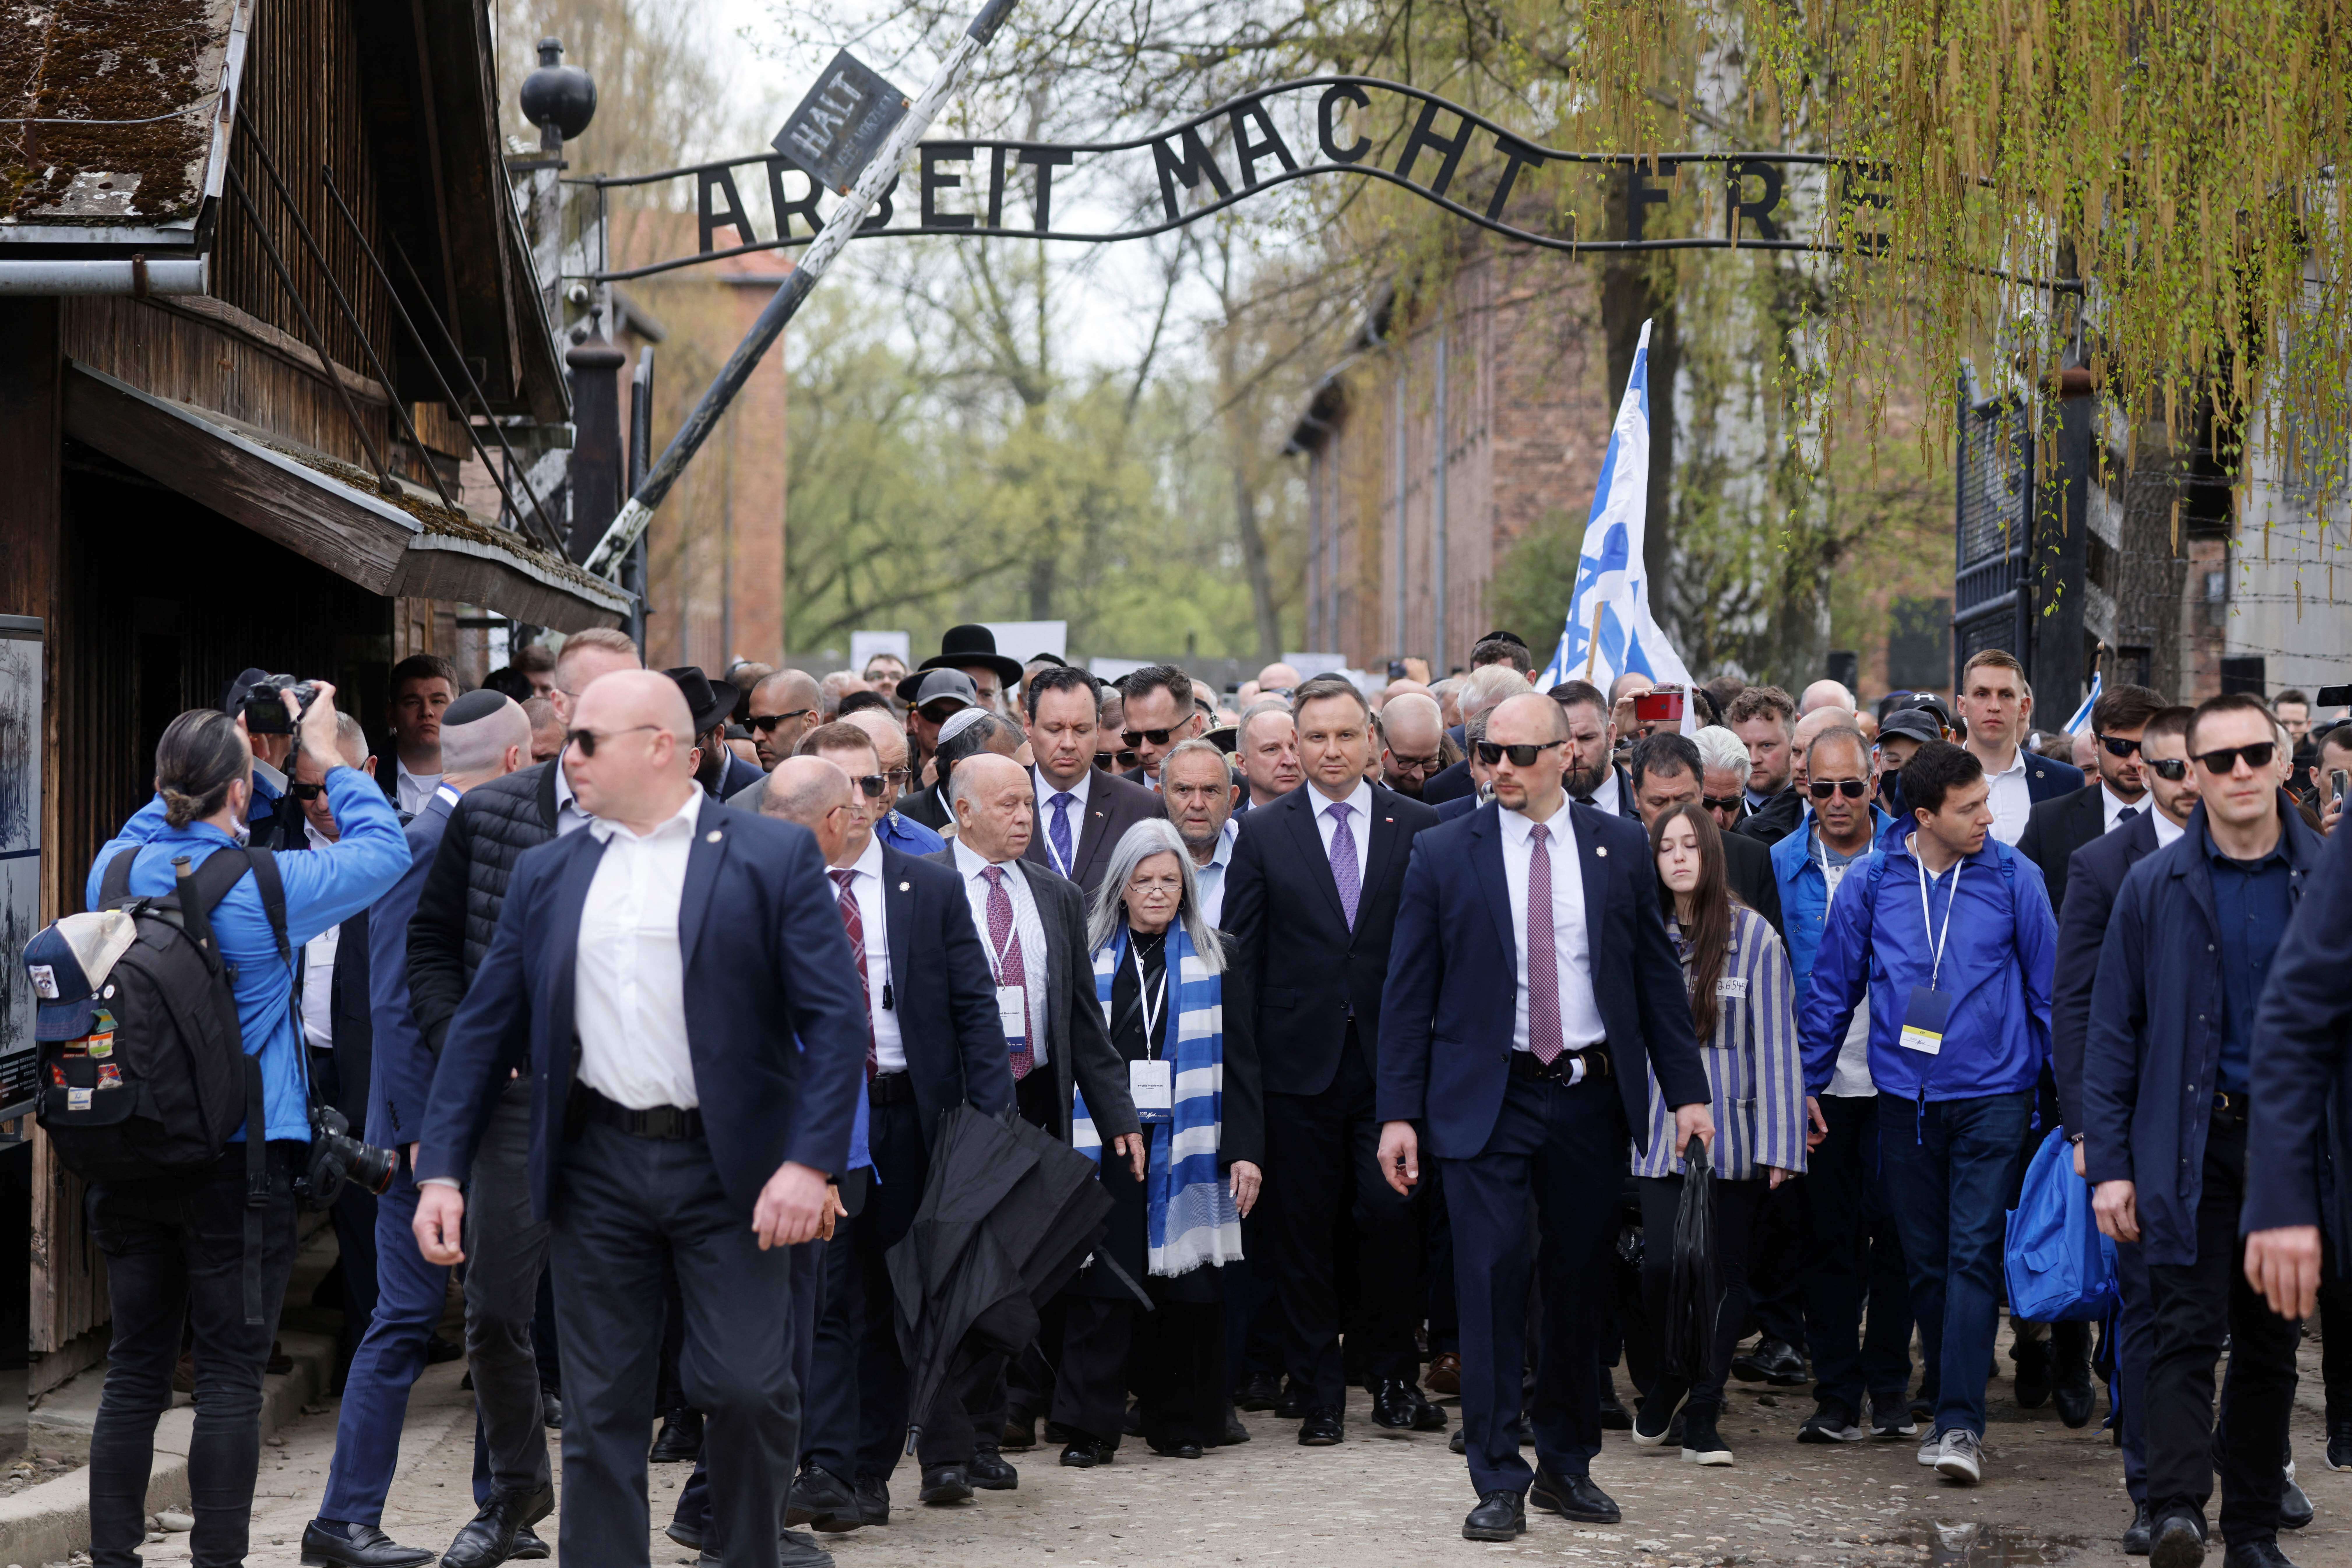 Polish President Andrzej Duda (C-R) walks with other participants through the main gate of the former Auschwitz-Birkenau camp with the lettering 'Work makes you free' (Arbeit macht frei) during The March of the Living in Oswiecim, Poland on April 28, 2022